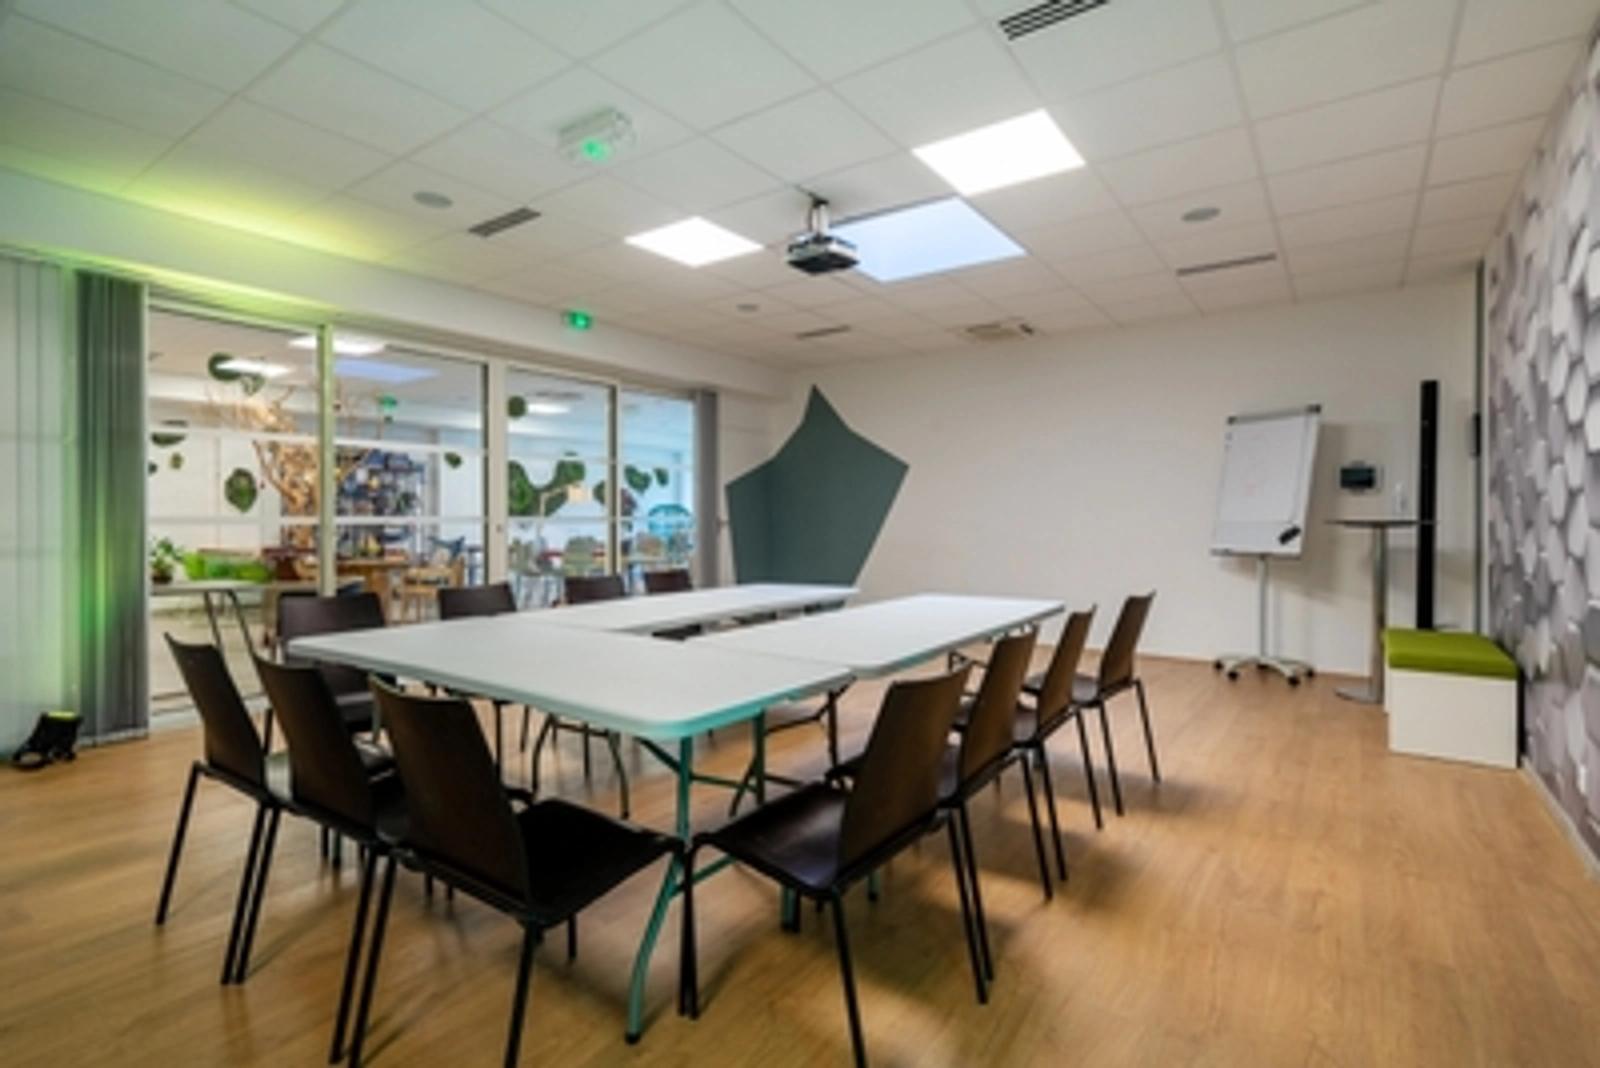 Meeting room in Zen room for your meetings or events - 0